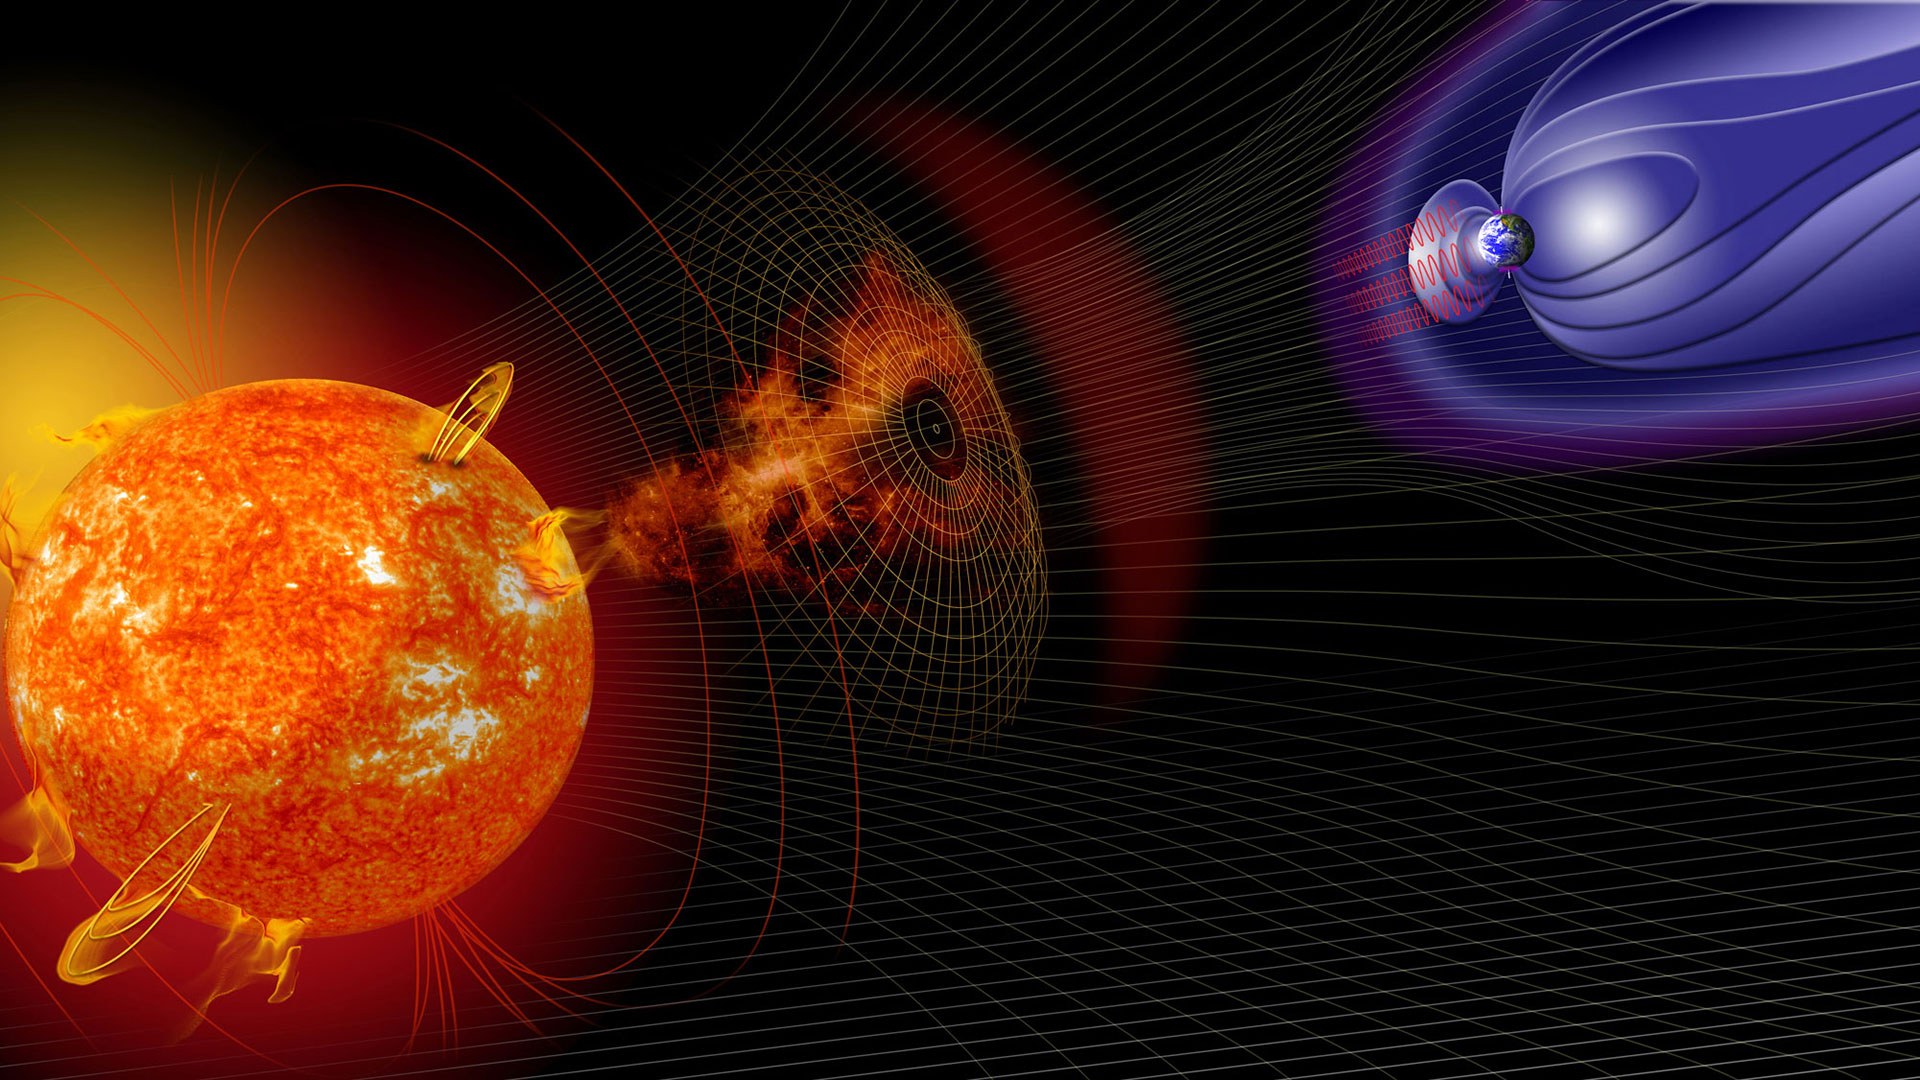 Space weather affects Earth's magnetic field